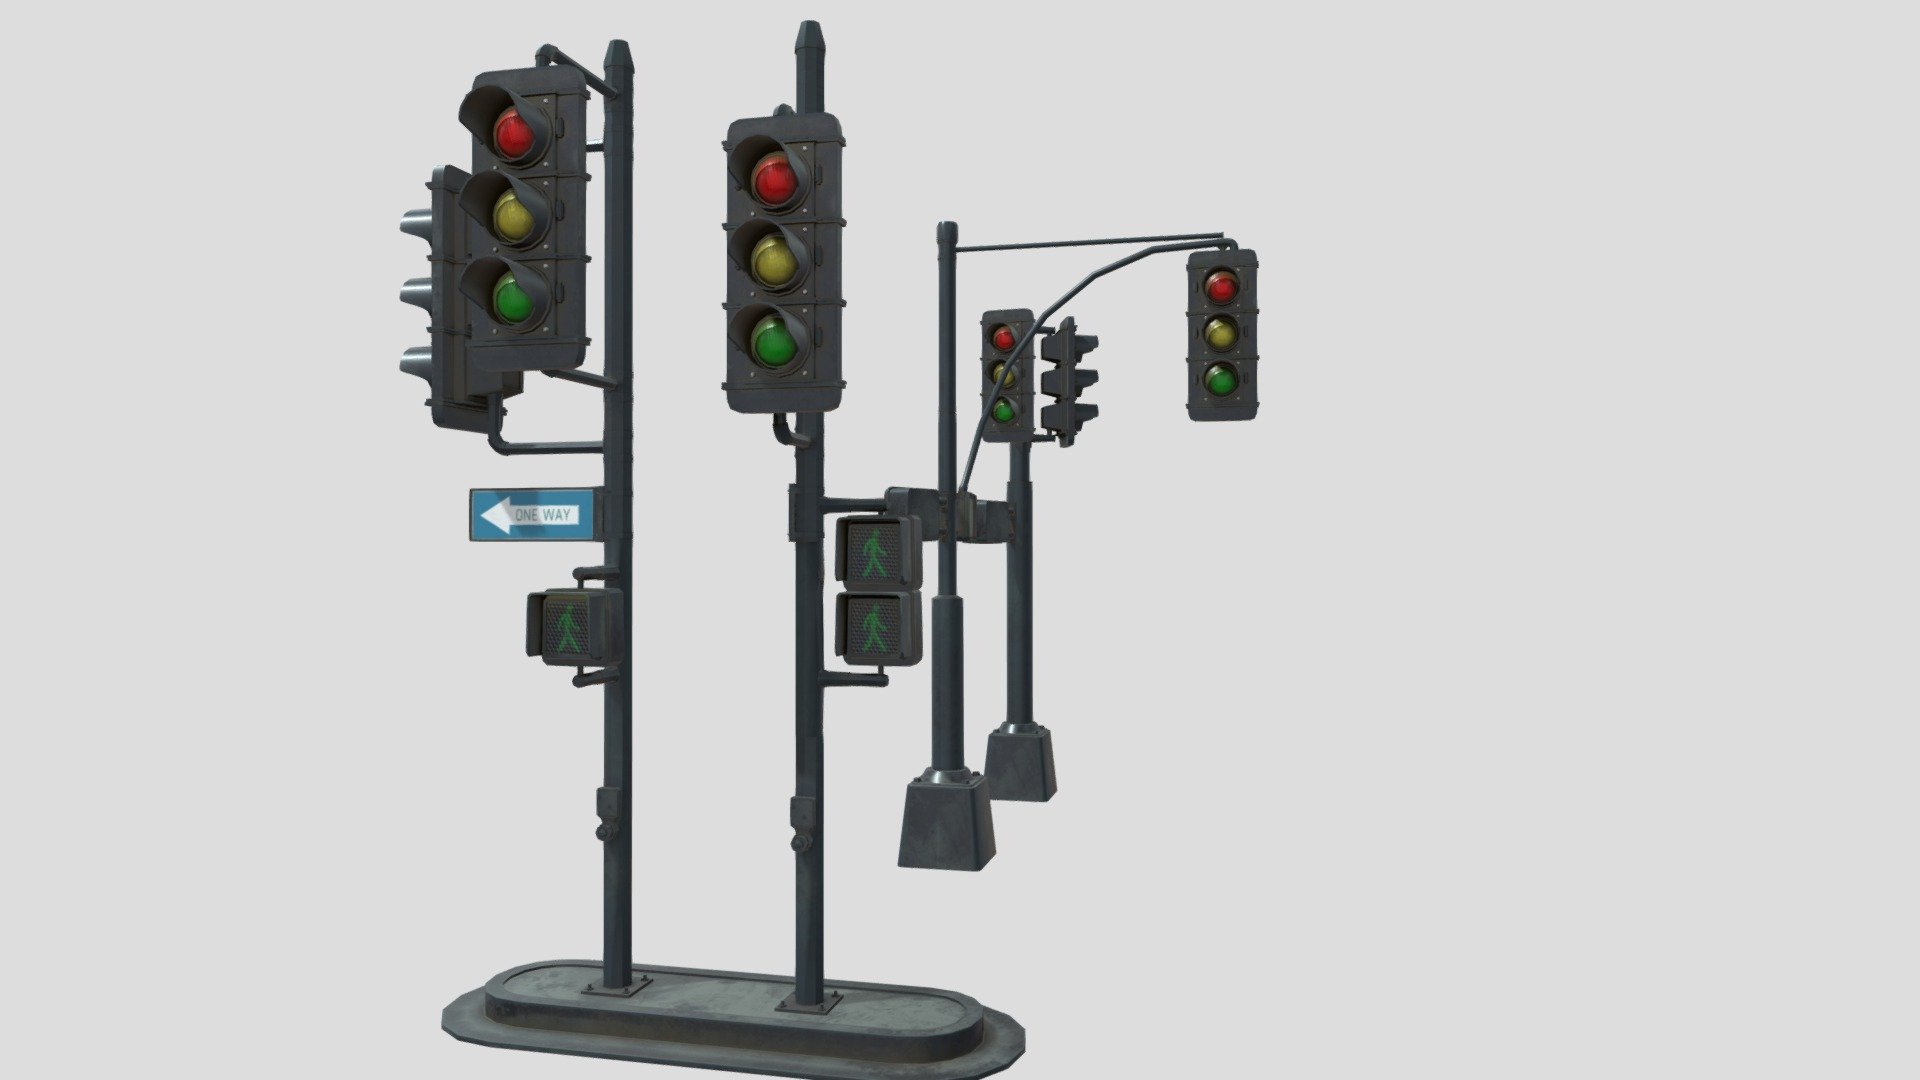 traffic lights with 4k pbr texture clean and dirty textures well uv unwrapped 4k textures includes clean and dirty textures - traffic lights with 4k texture clean and dirty - Buy Royalty Free 3D model by topchannel1on1 3d model